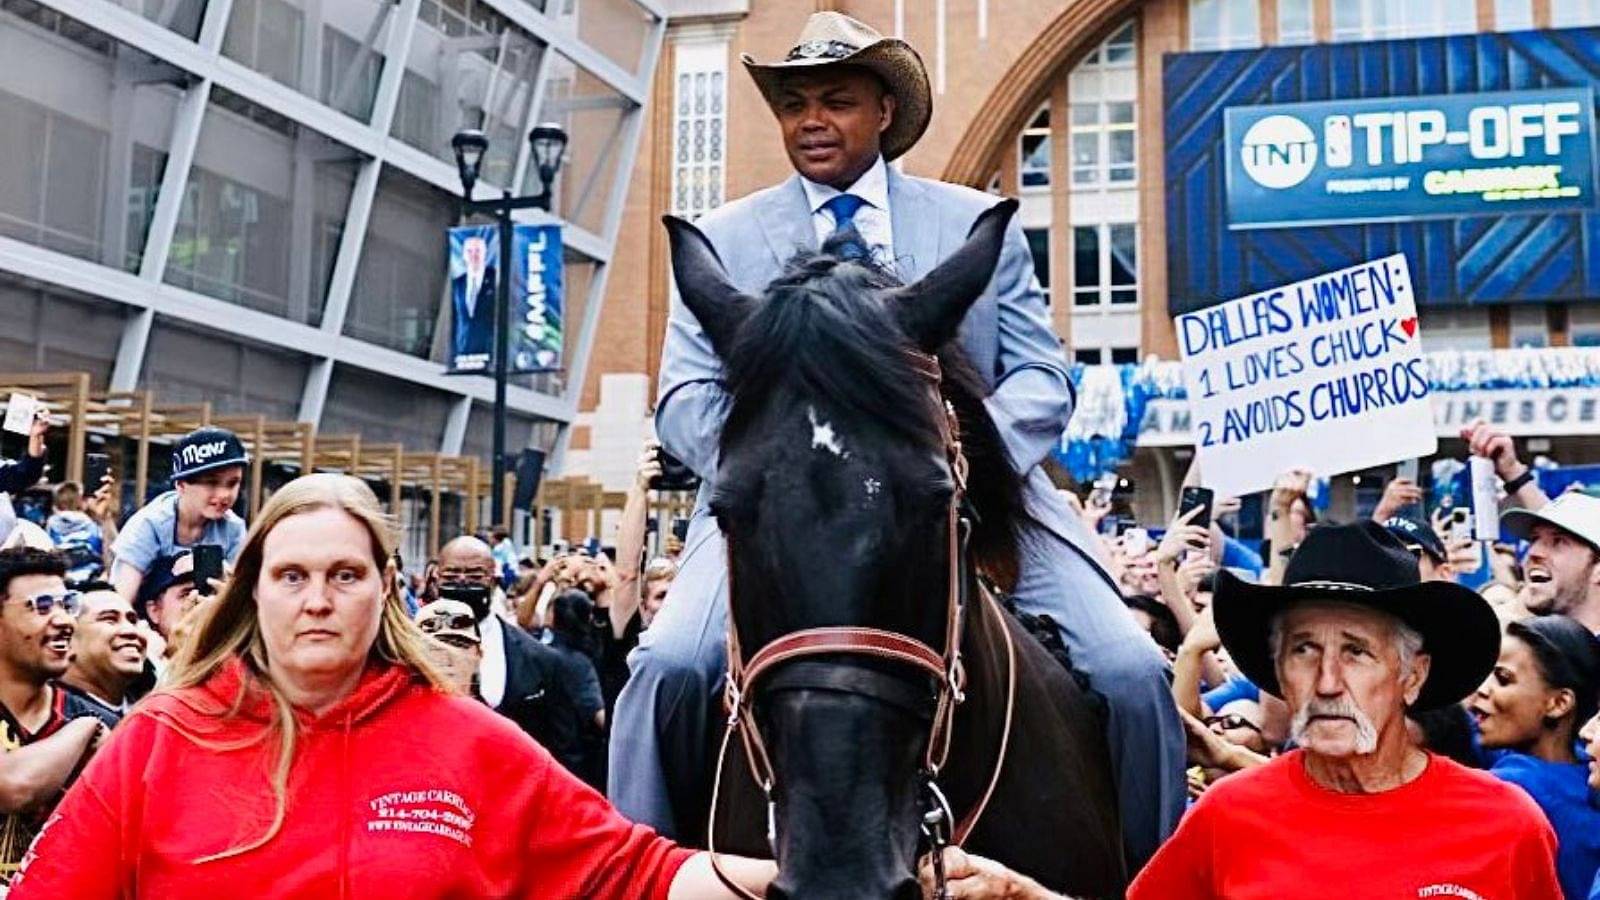 “Charles Barkley cannot ride a horse, I don’t believe it, an elephant? Maybe”: Shaquille O’Neal and NBA Twitter went in denial watching Chuck ride a horse in Dallas